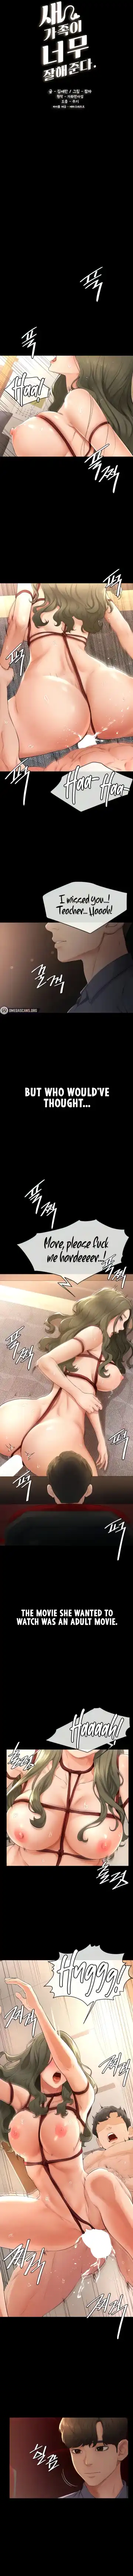 My New Family Treats Me Well Fhentai.net - Page 33